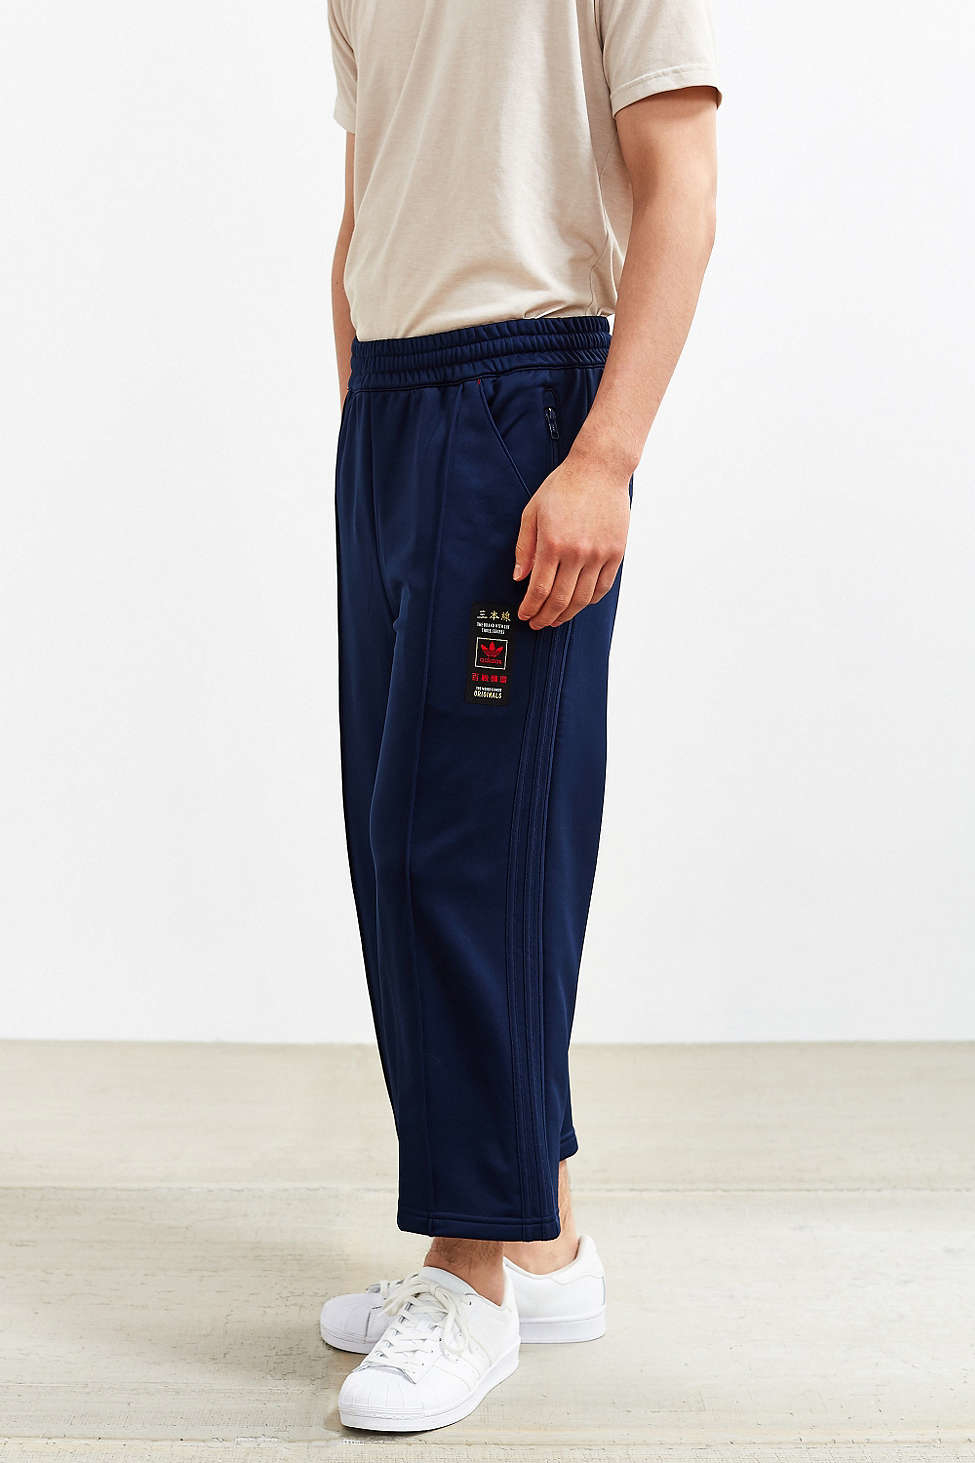 Lyst - Adidas Originals Budo 3/4 Wide Leg Cropped Pant in Blue for Men